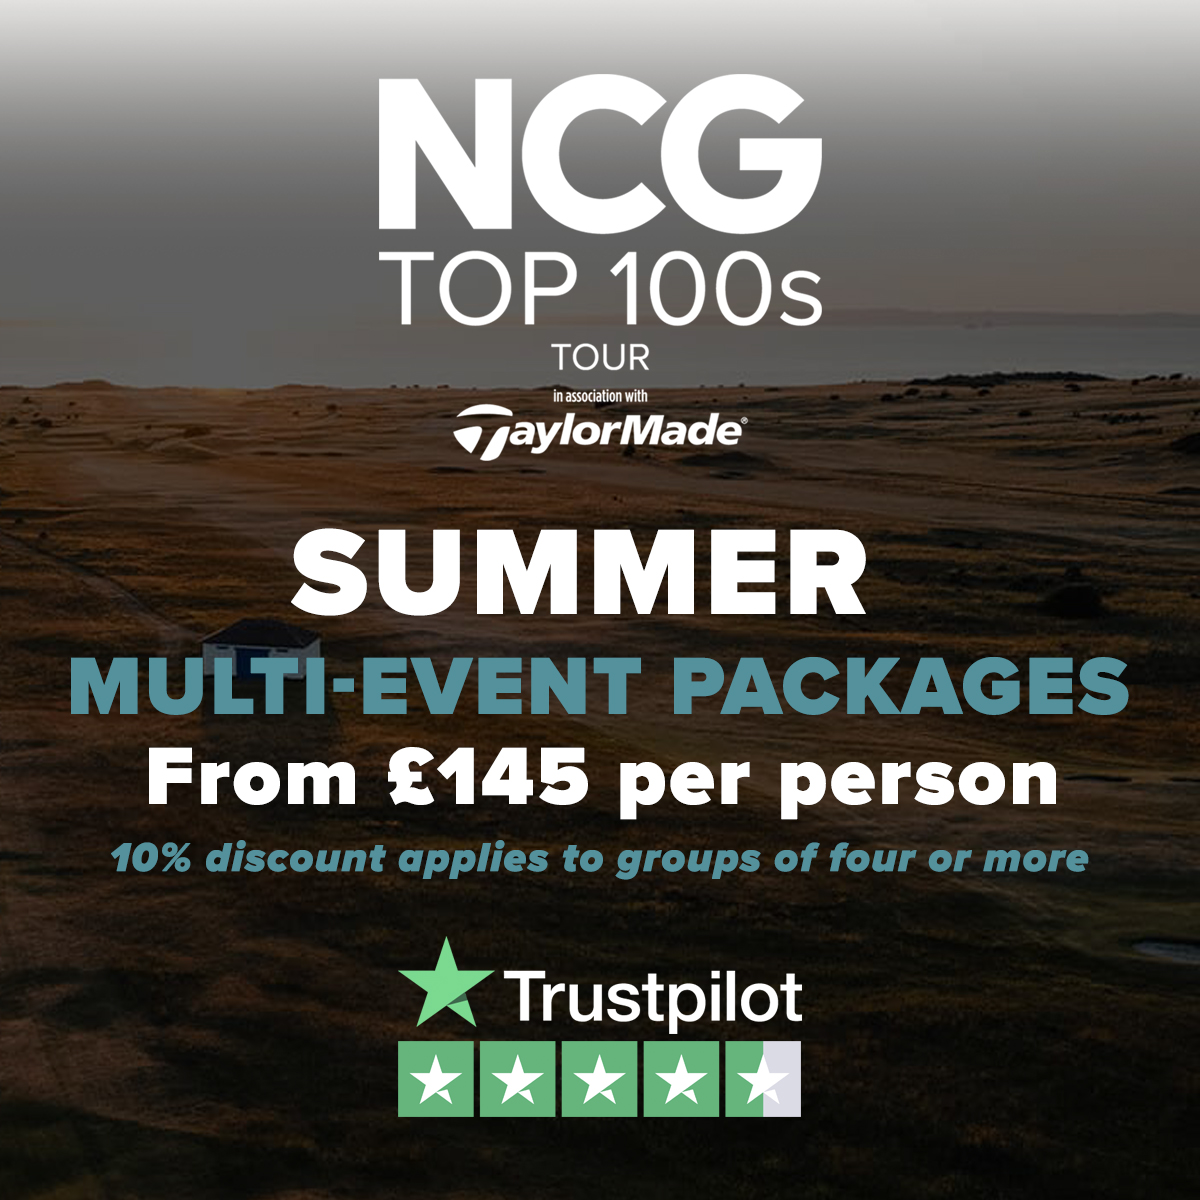 Book your summer golf trips ☀️ The summer golf season is right around the corner and it's time to get your golfing diaries in order. We have a number of packages to choose from over the course of the summer at some of the UK's best golfing venues. ncgtop100stour.com/product-catego…